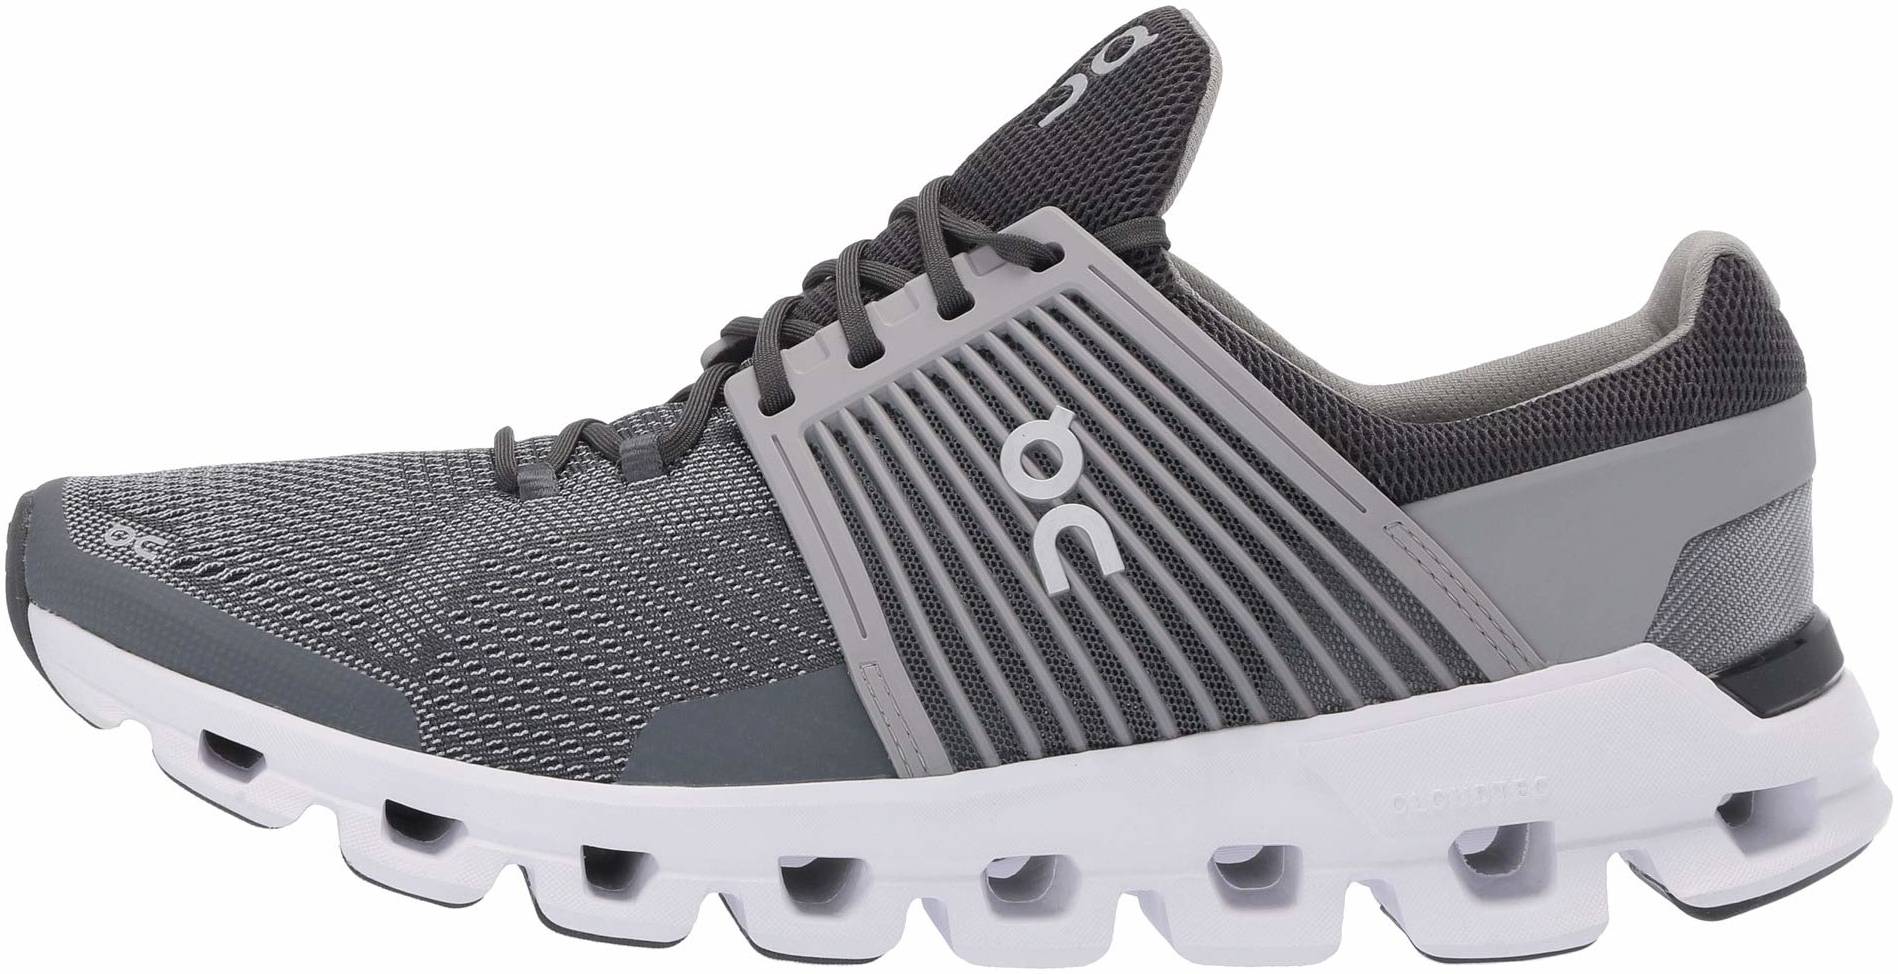 20+ On running shoes: Save up to 21% | RunRepeat